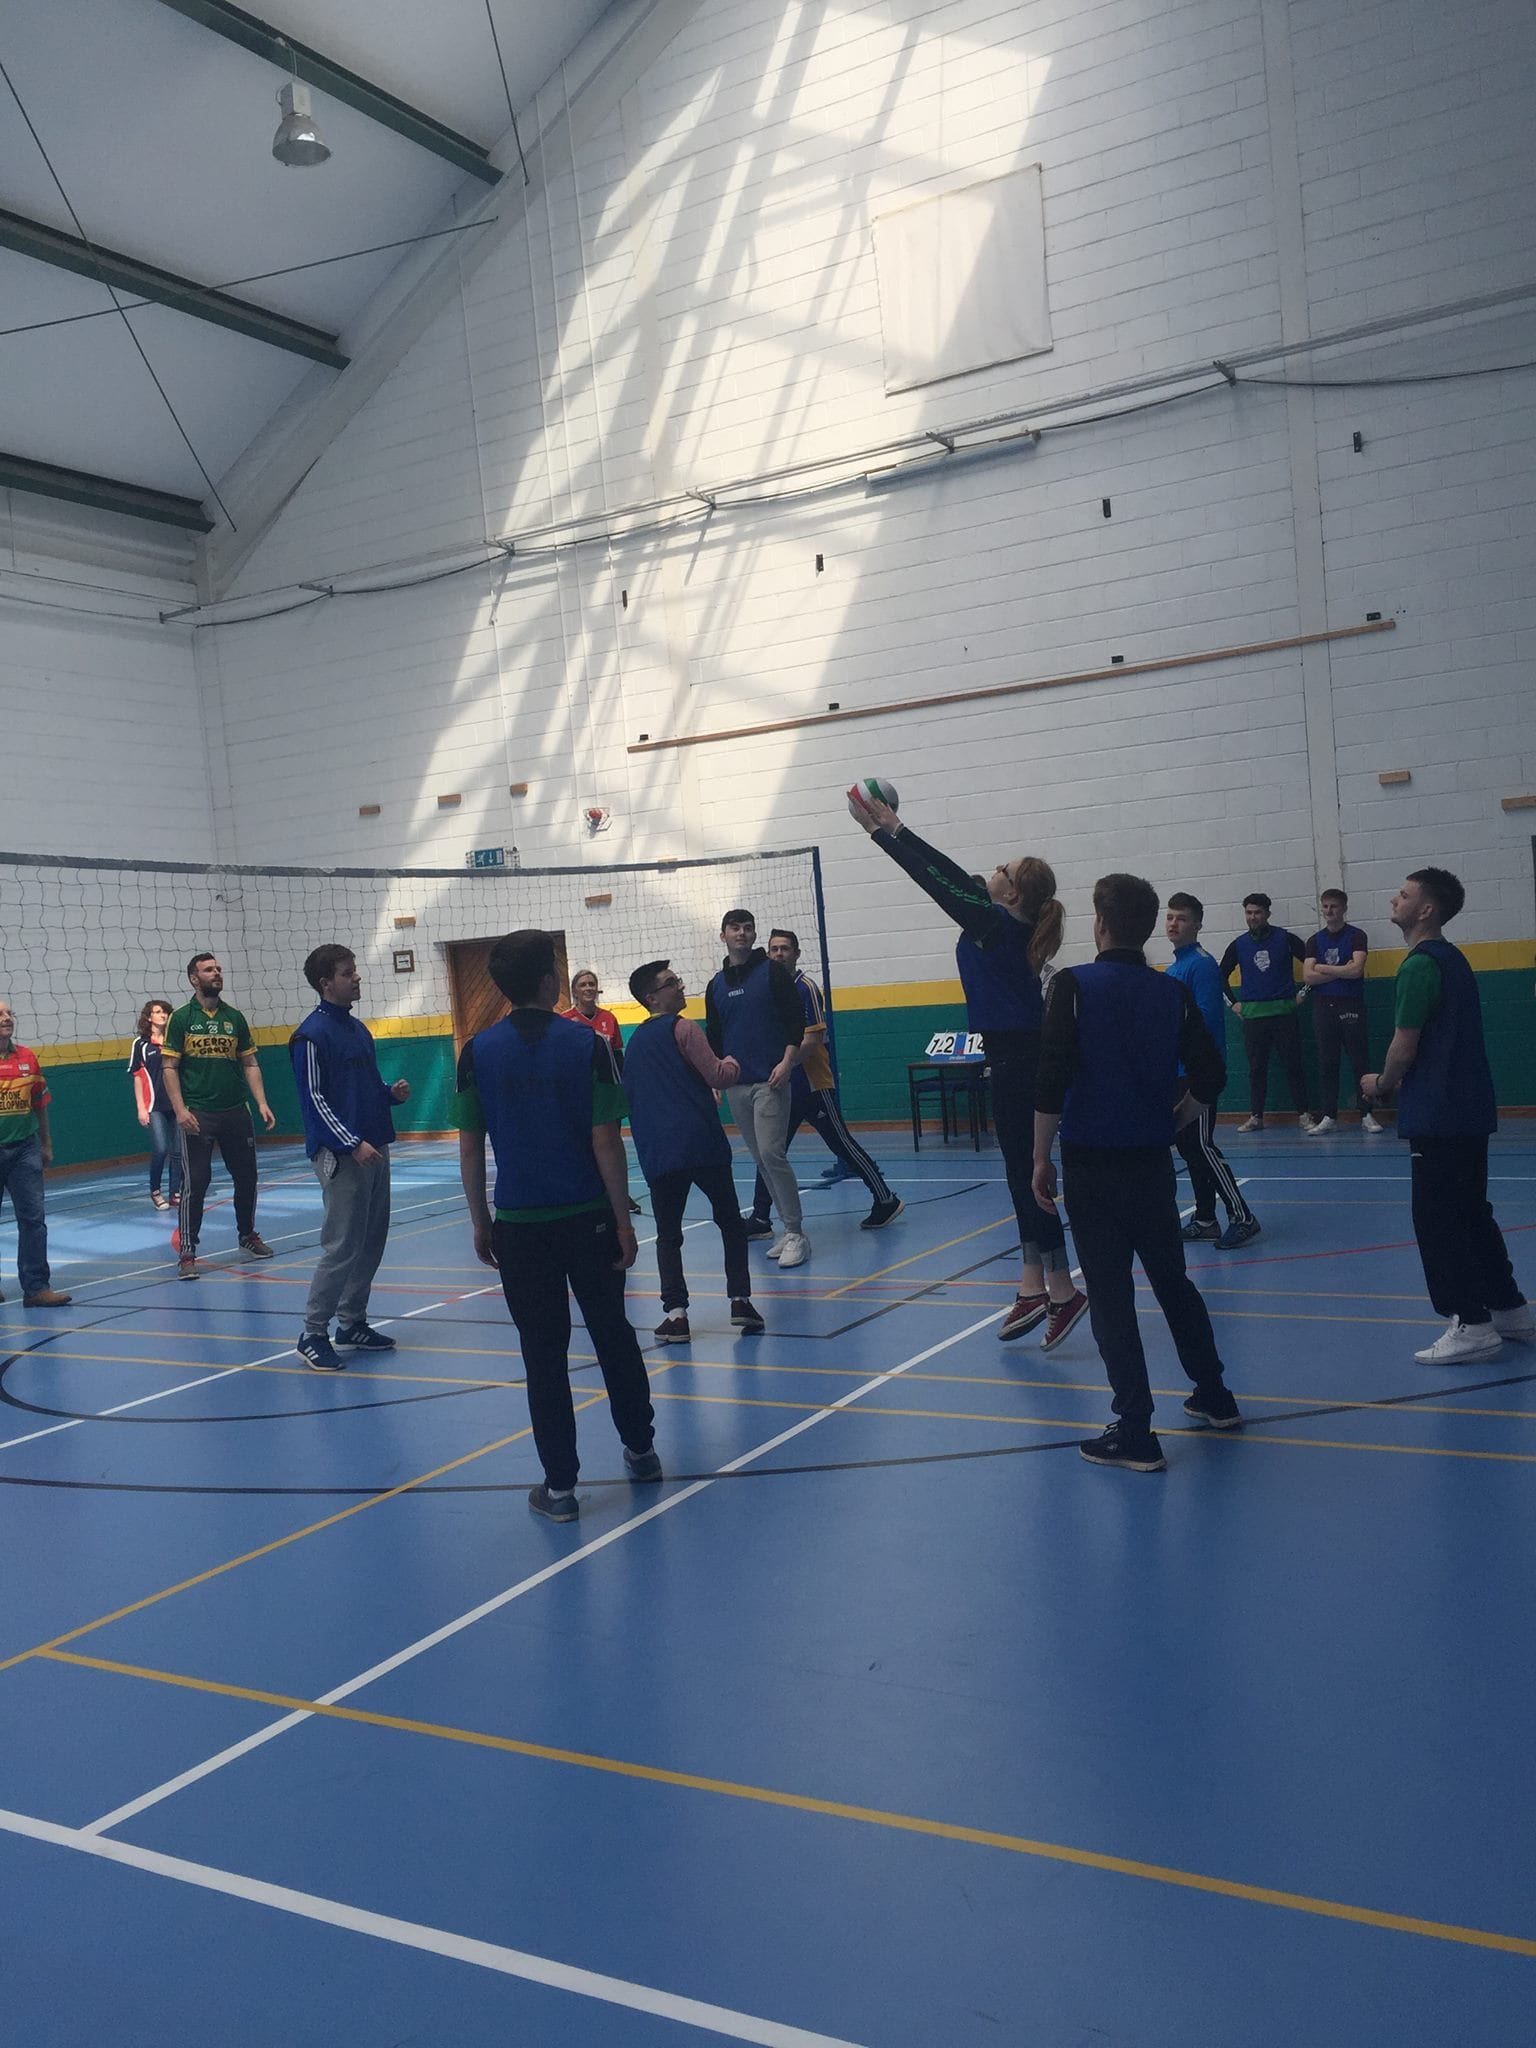 22nd April 2016: Desmond College Active Schools Week 2016: Teacher v Students Volleyball Match on Active Friday